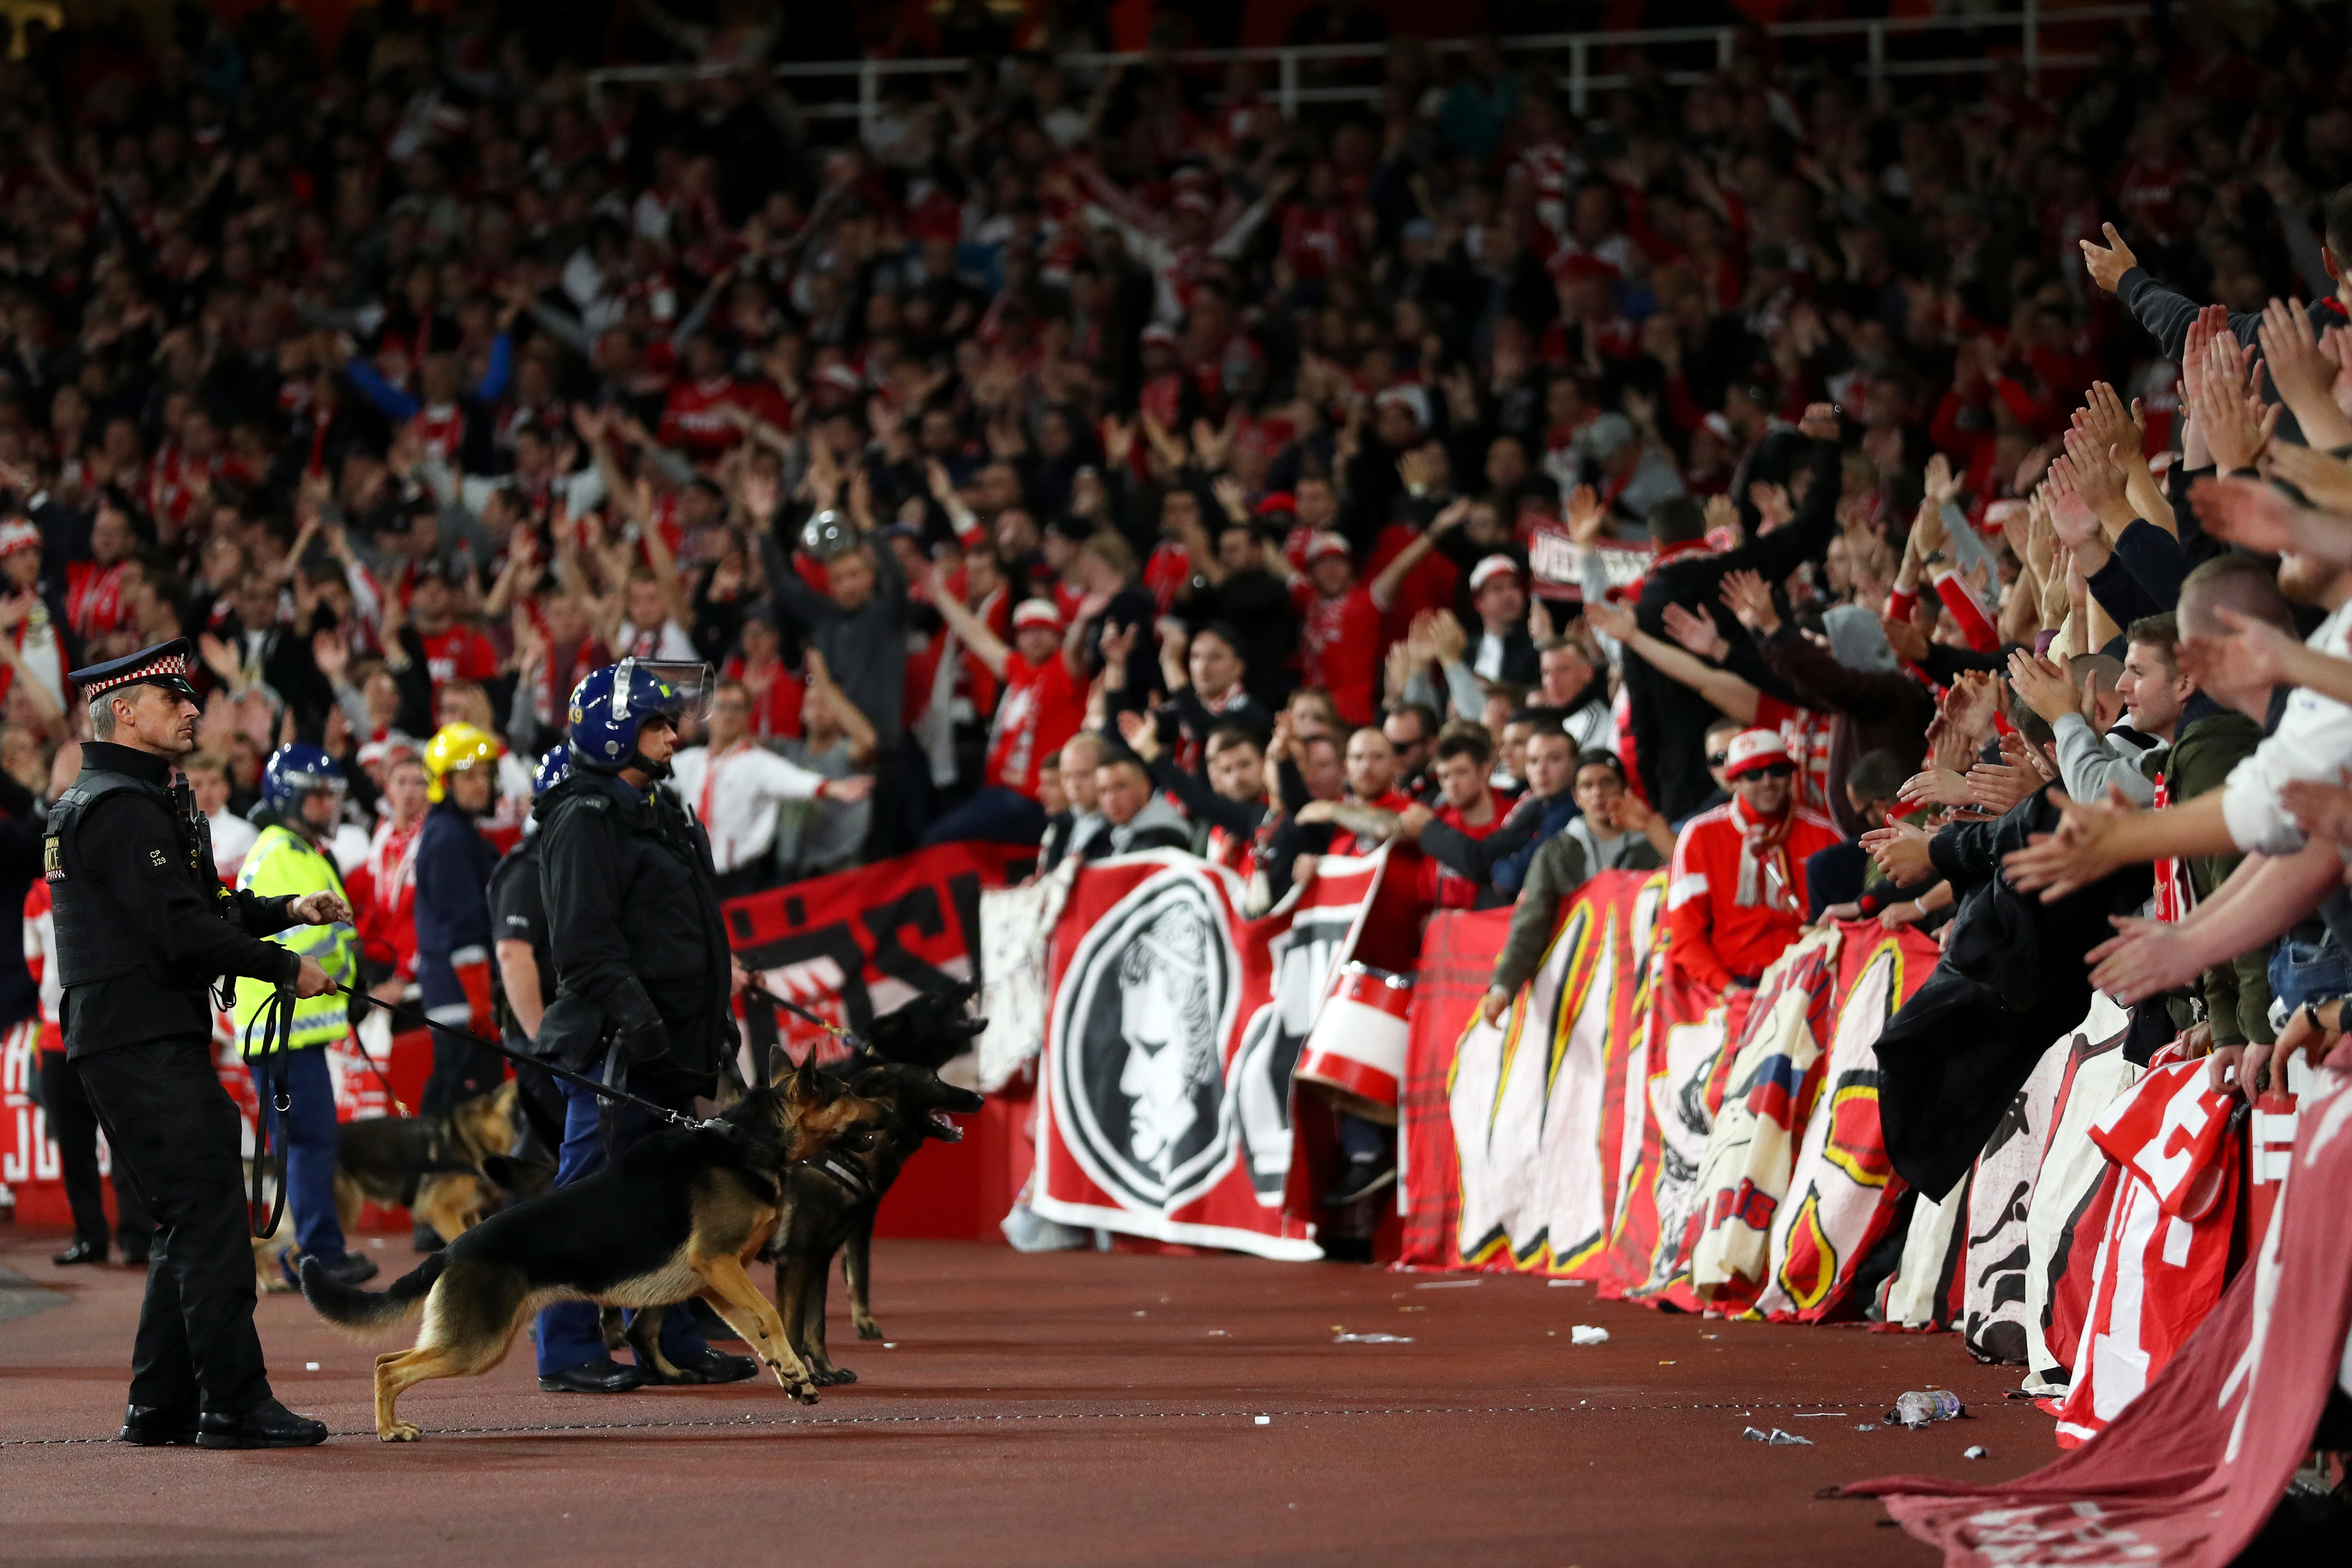 Riot police with dogs stand in front of fans ahead of the match (Richard Heathcote/Getty Images)